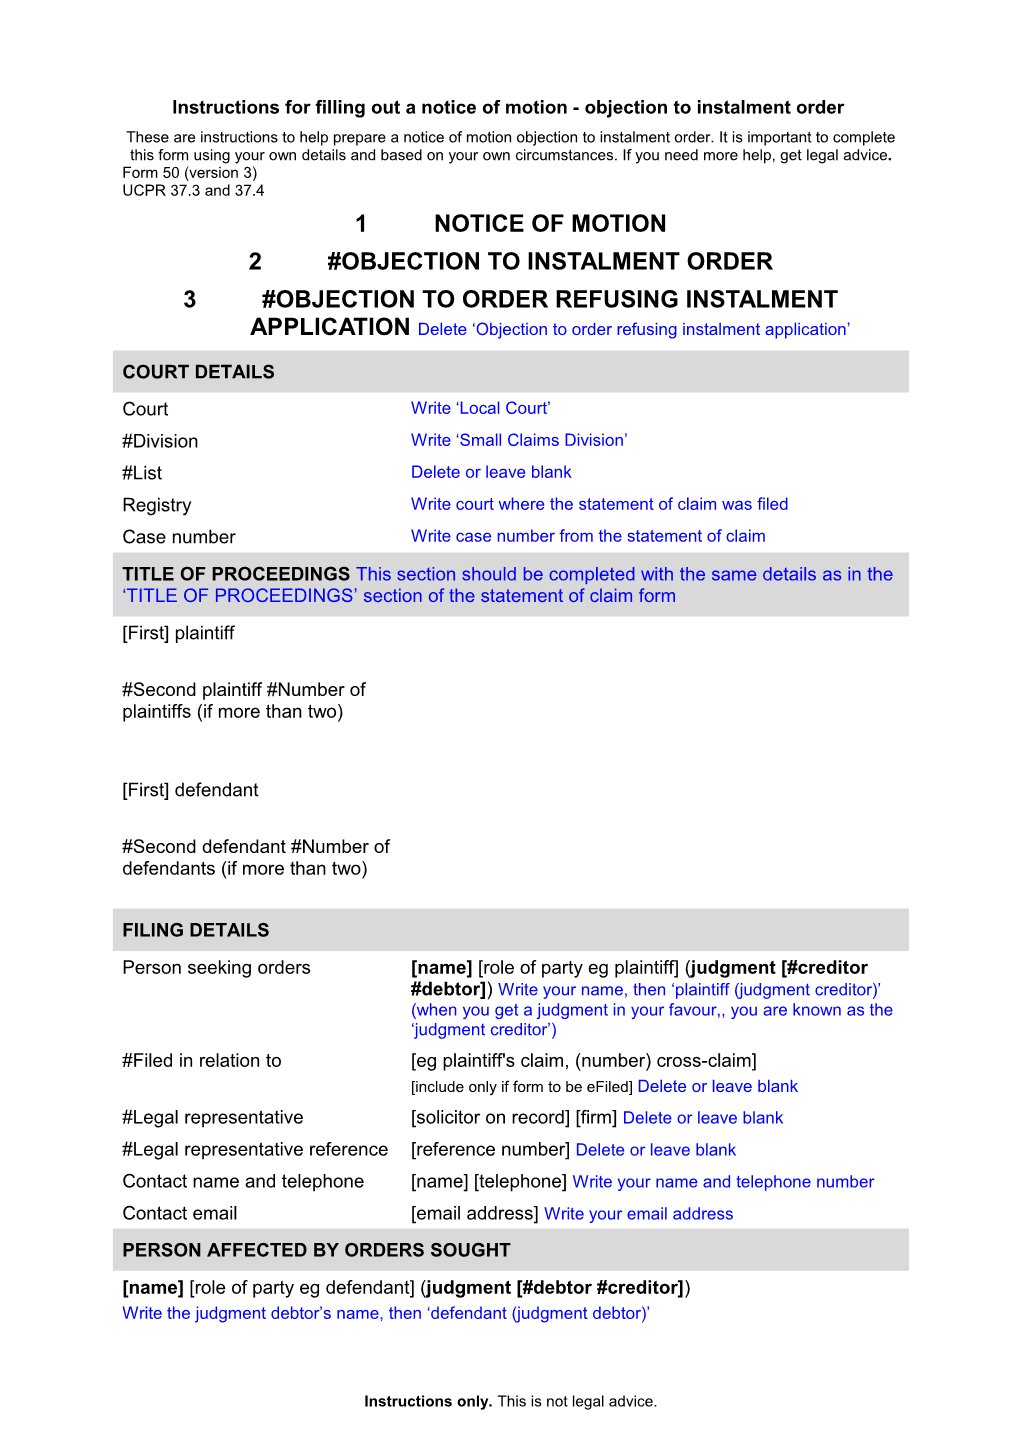 Form 50 - Notice of Motion Objection to Instalment Order Or Order Refusing Instalment